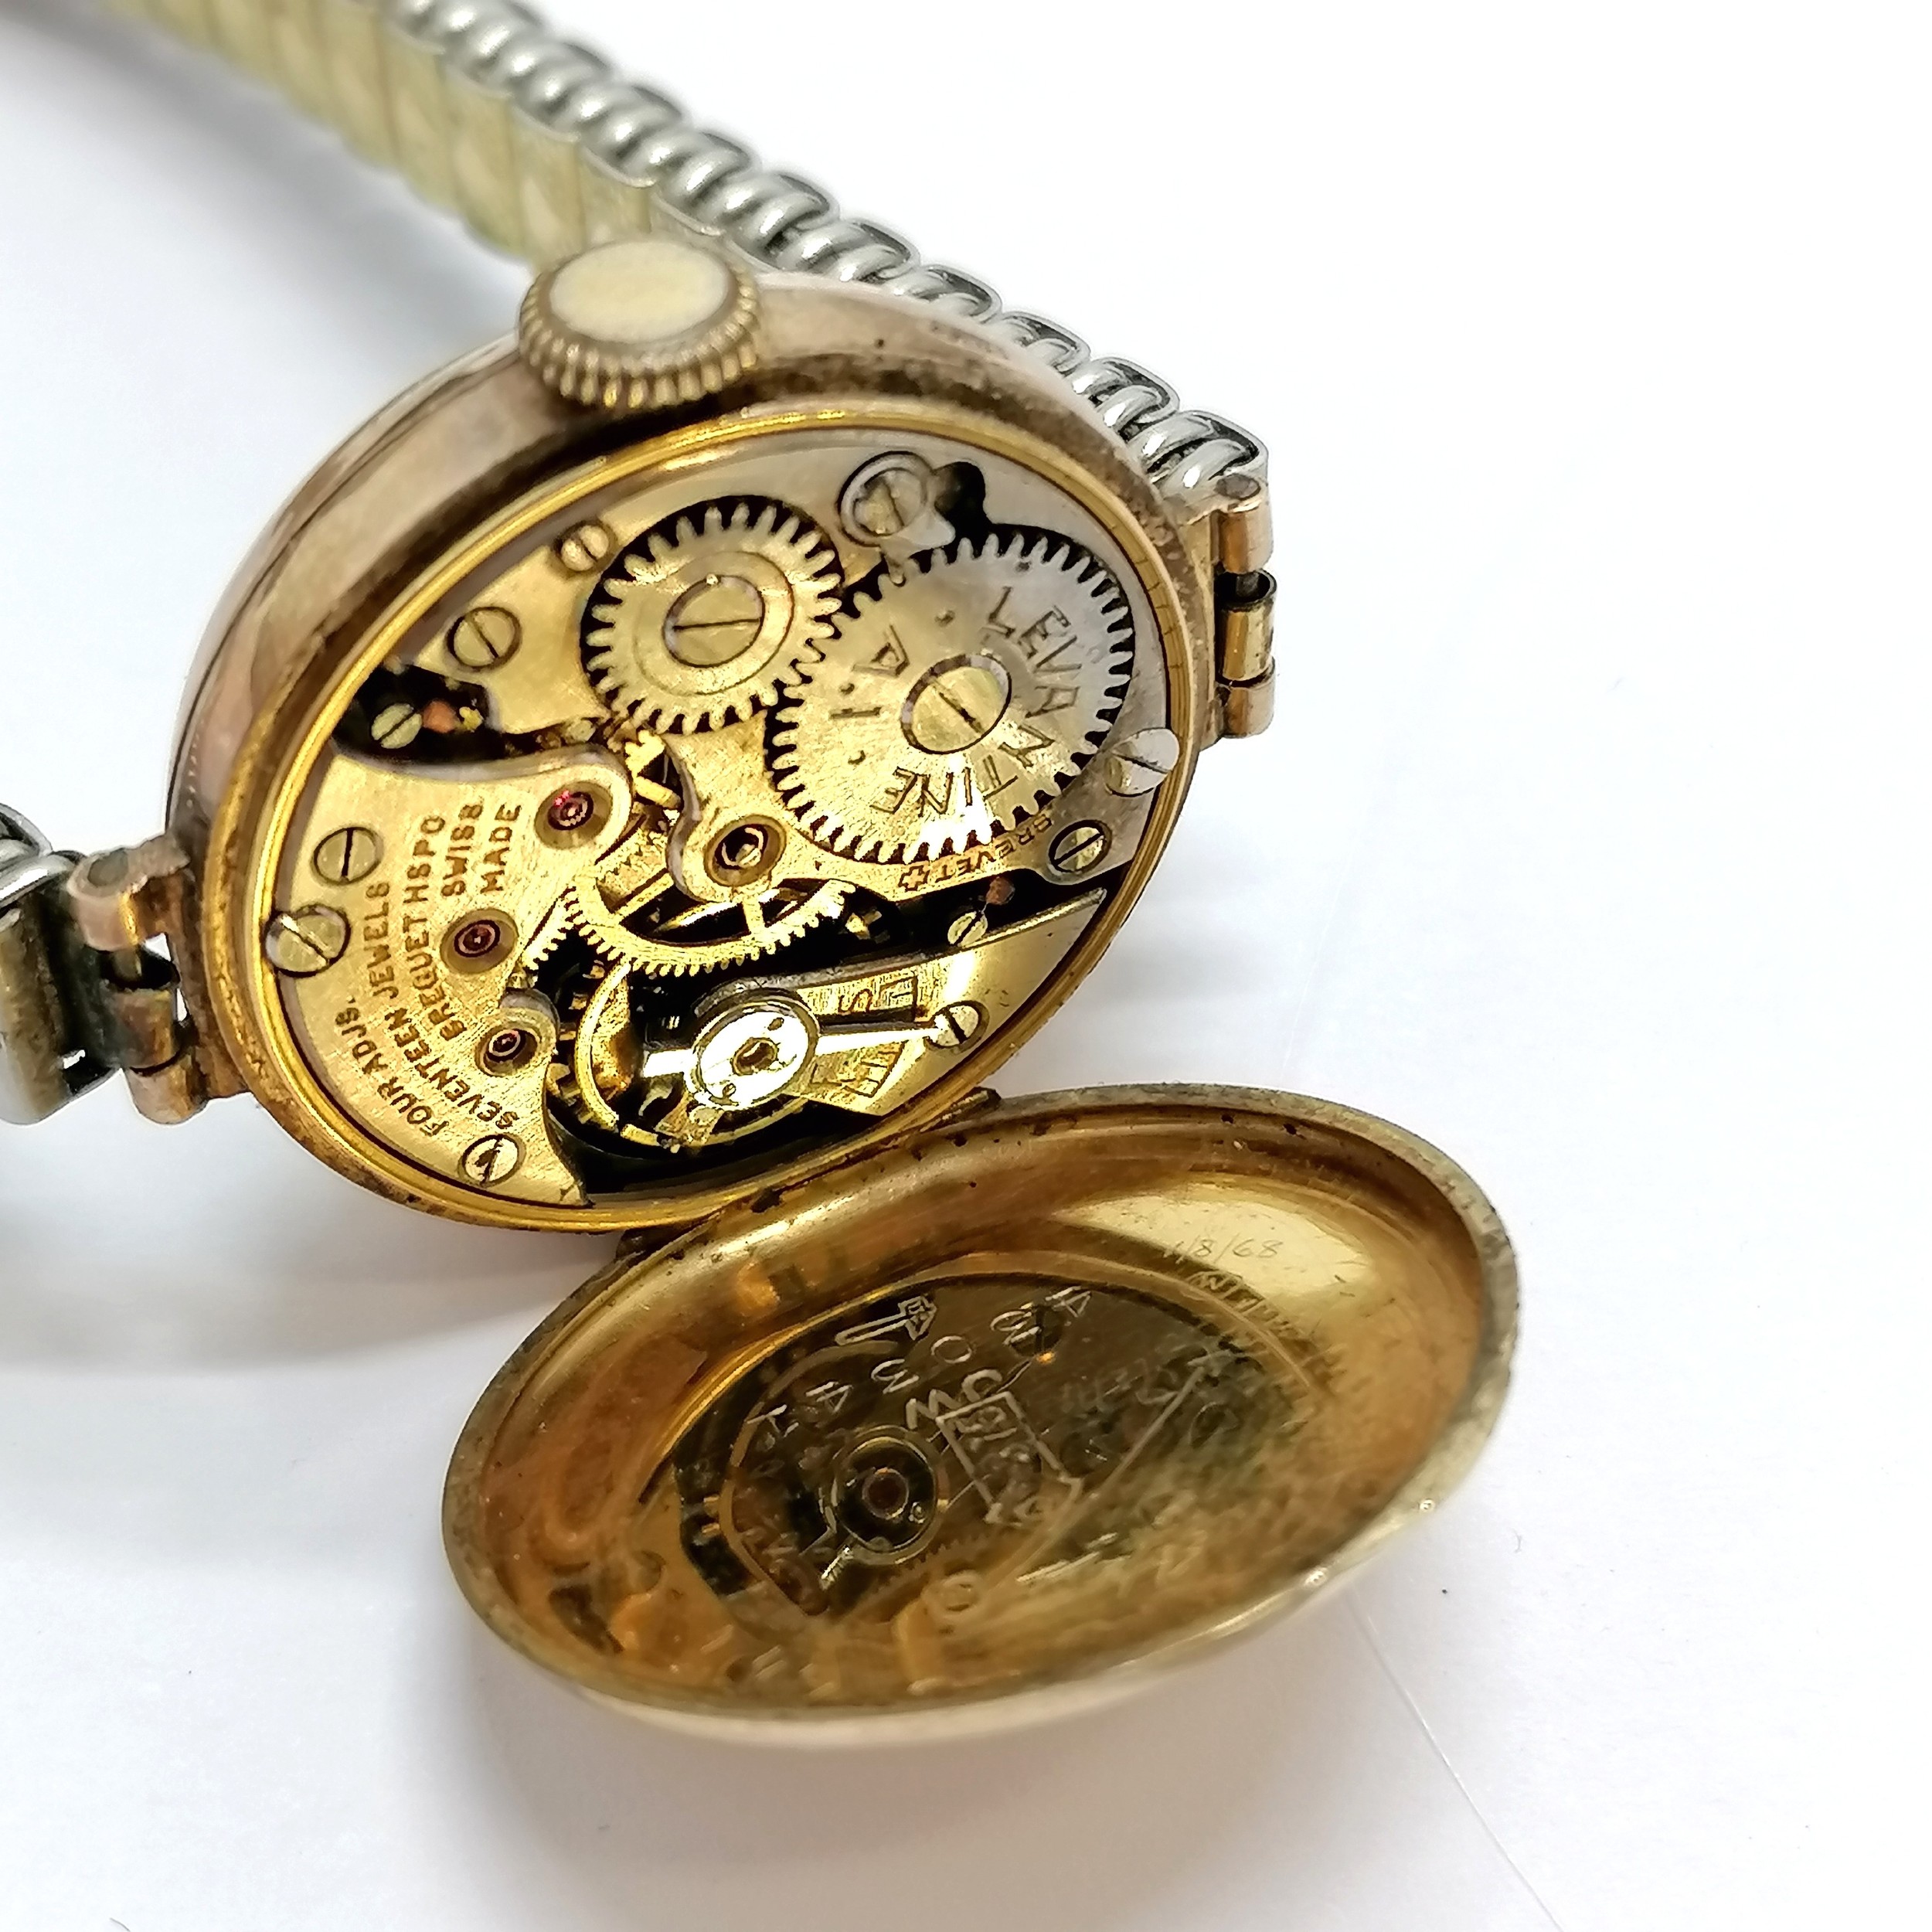 Breguet HSPG swiss made (marked Levantine A1 marked cog) 9ct gold 20mm cased wristwatch in - Image 2 of 4